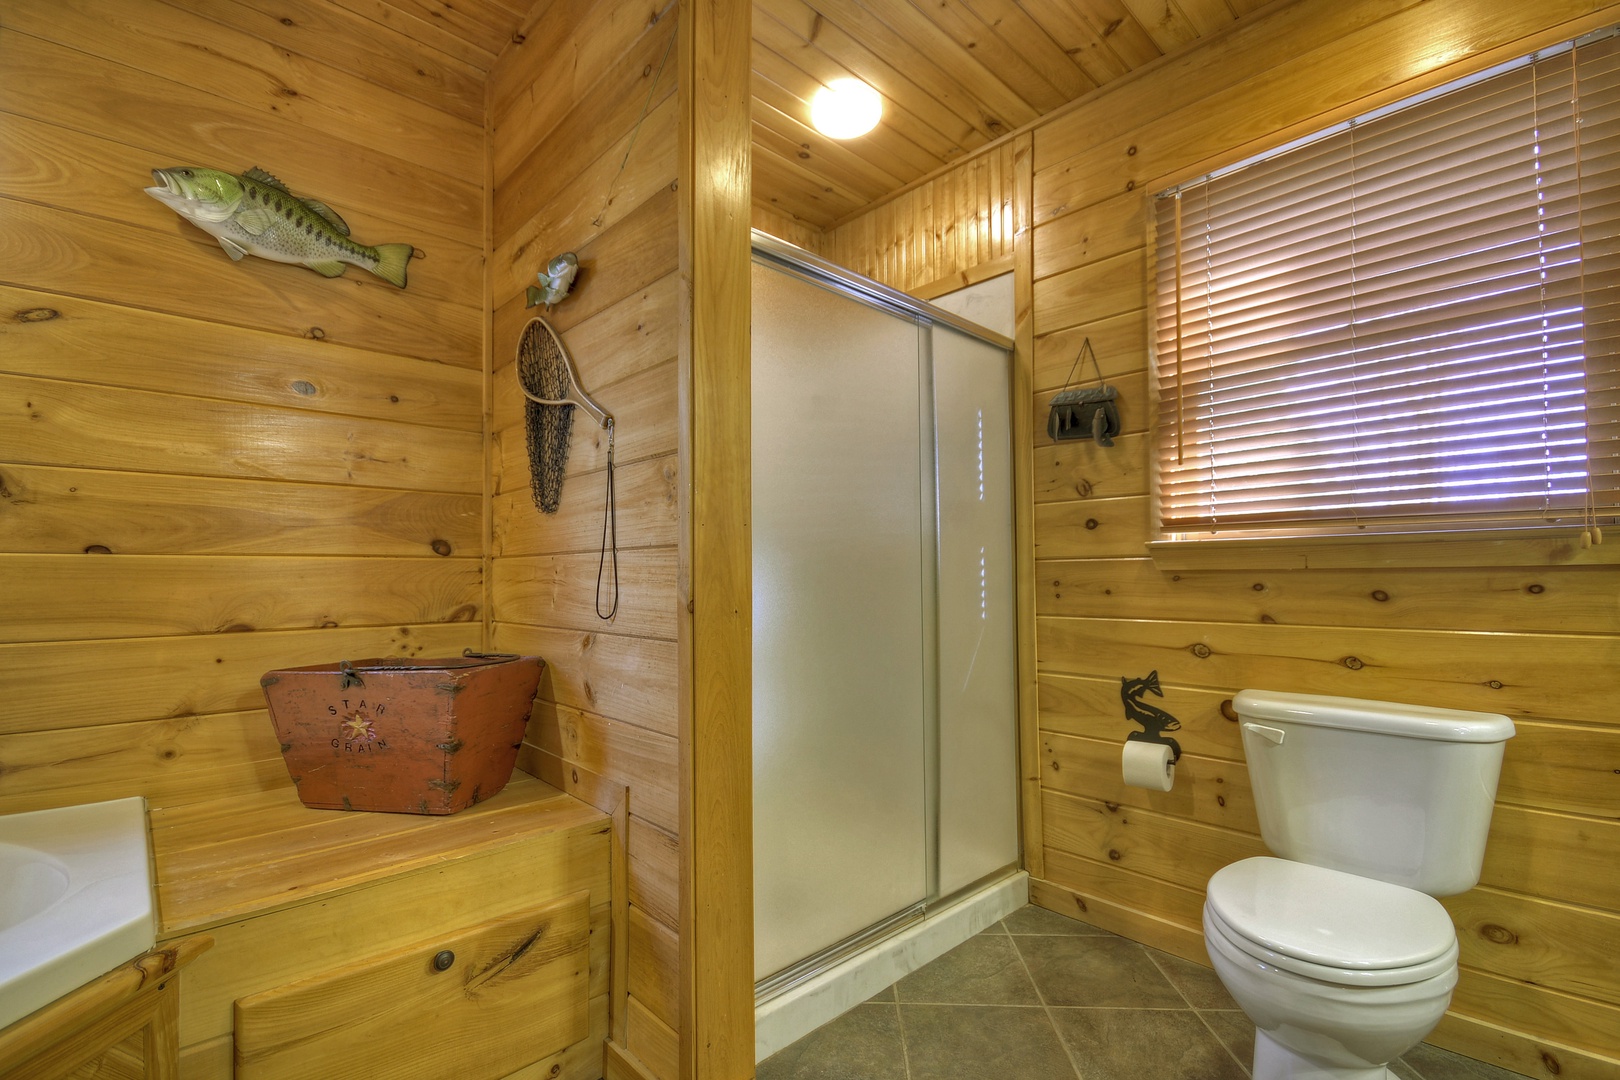 Grand Mountain Lodge- Entry level master bathroom with shower and toilet